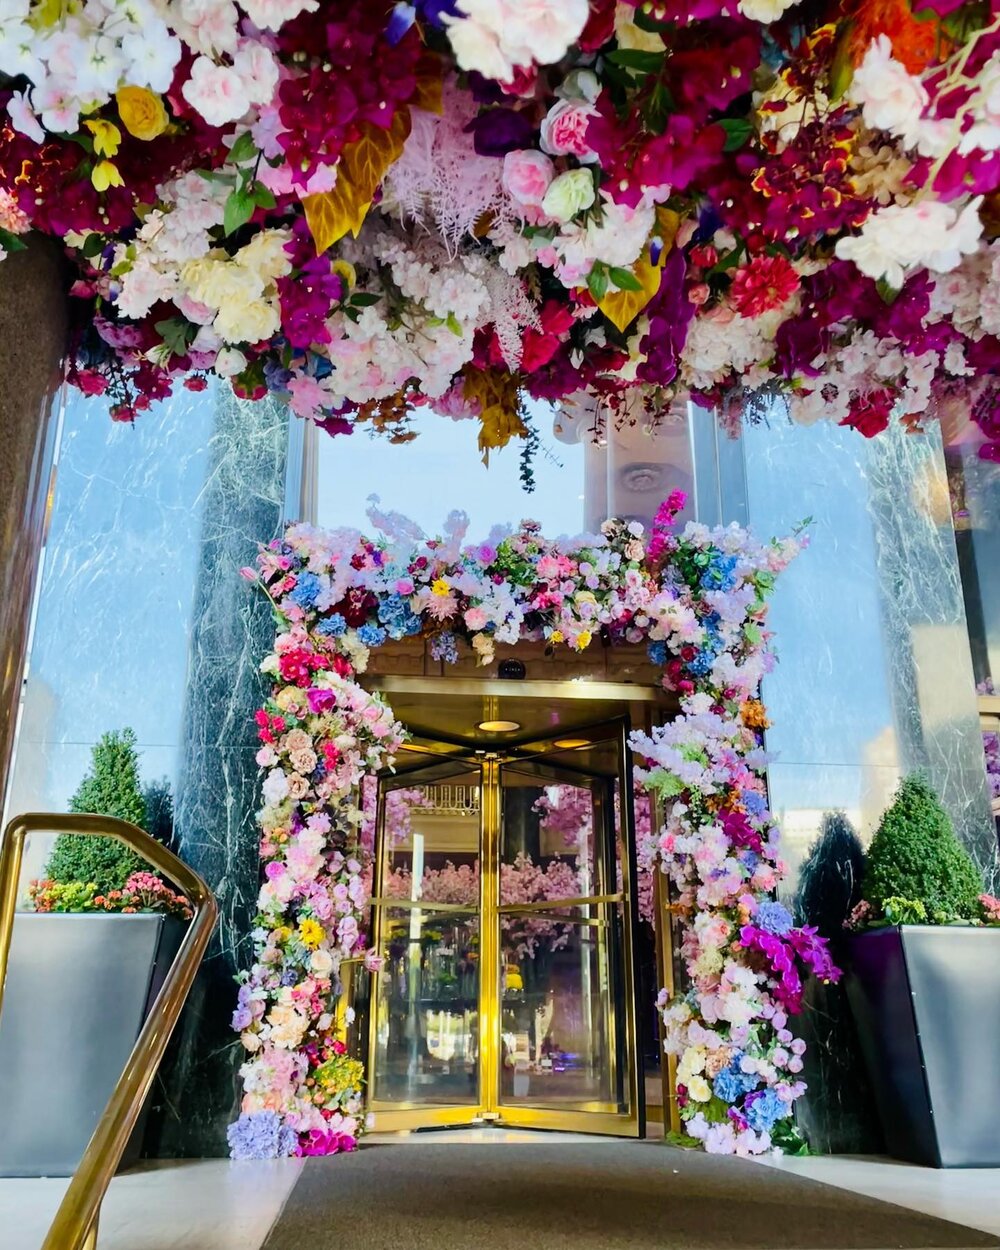 All decked out for spring! 🌸🌼🌺🌷💐 San Francisco was blooming during our recent visit. Loved the flowers at the St. Francis! We stayed at the lovely Beacon Grand Hotel (formerly Sir Francis Drake) just steps from Union Square. During our stay we r